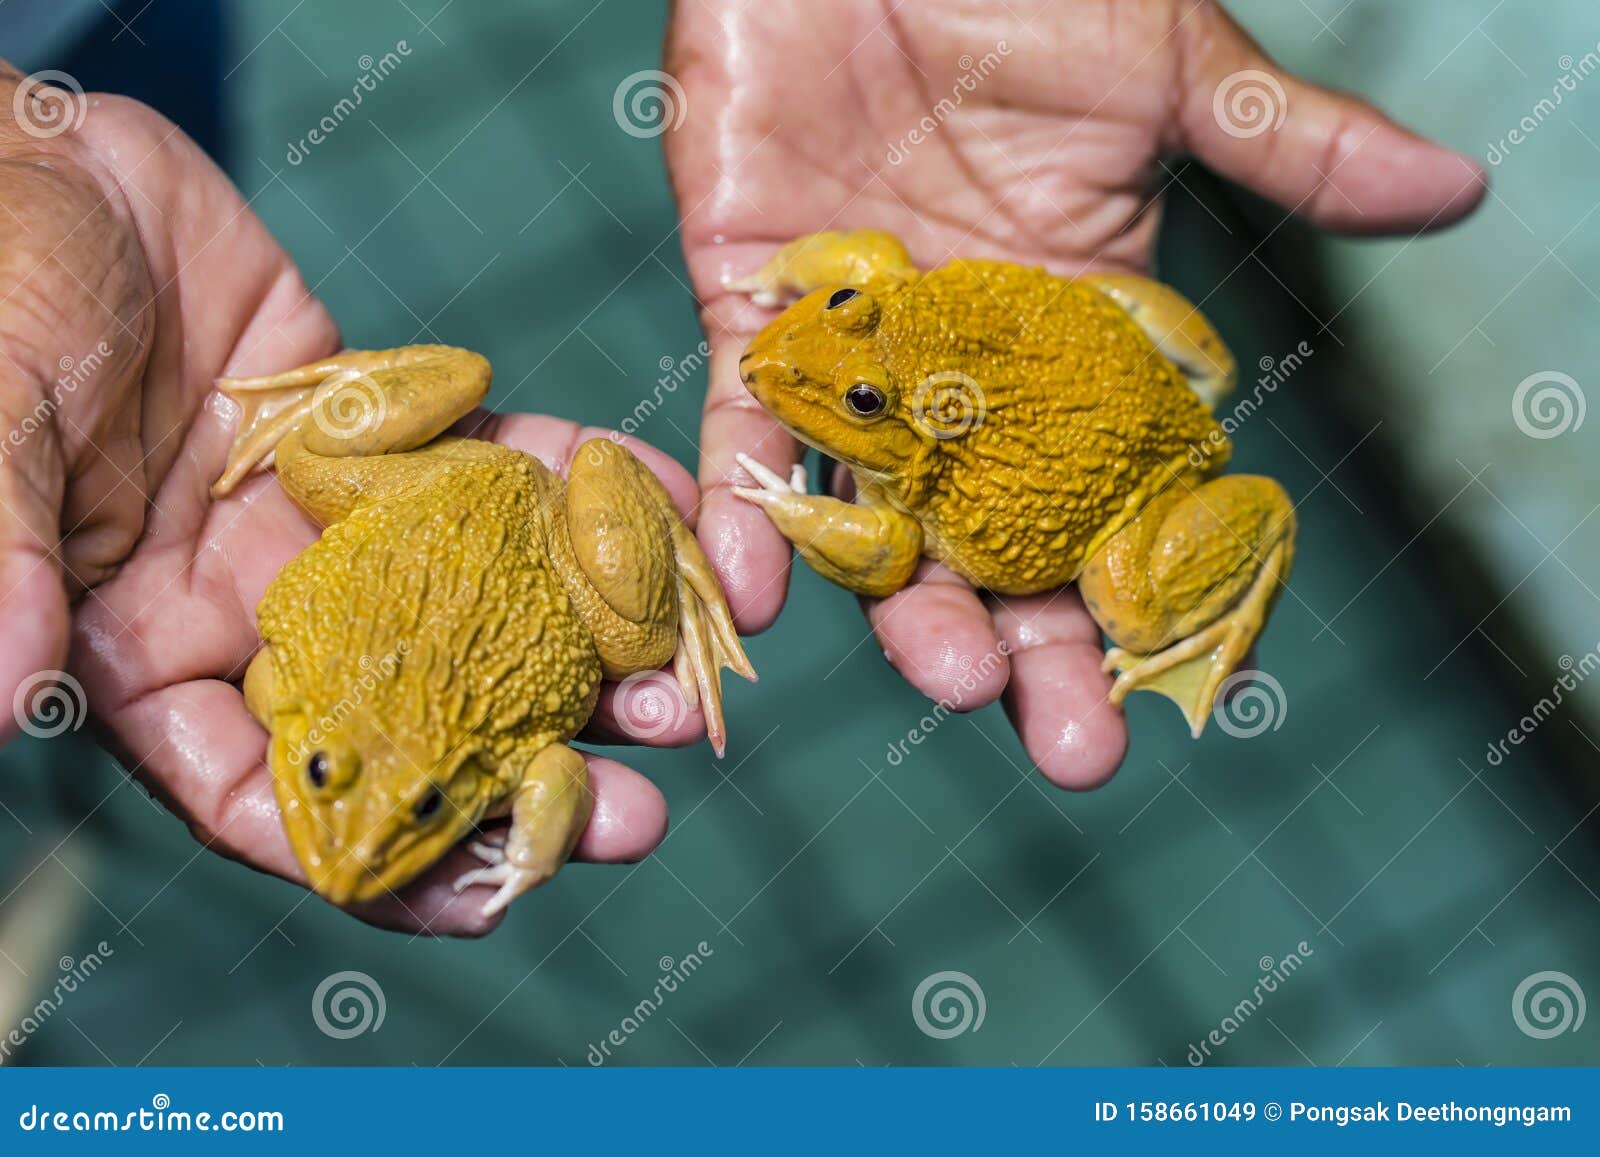 https://thumbs.dreamstime.com/z/raising-meat-frogs-food-one-popular-pets-cooking-its-soft-texture-delicious-flavor-158661049.jpg